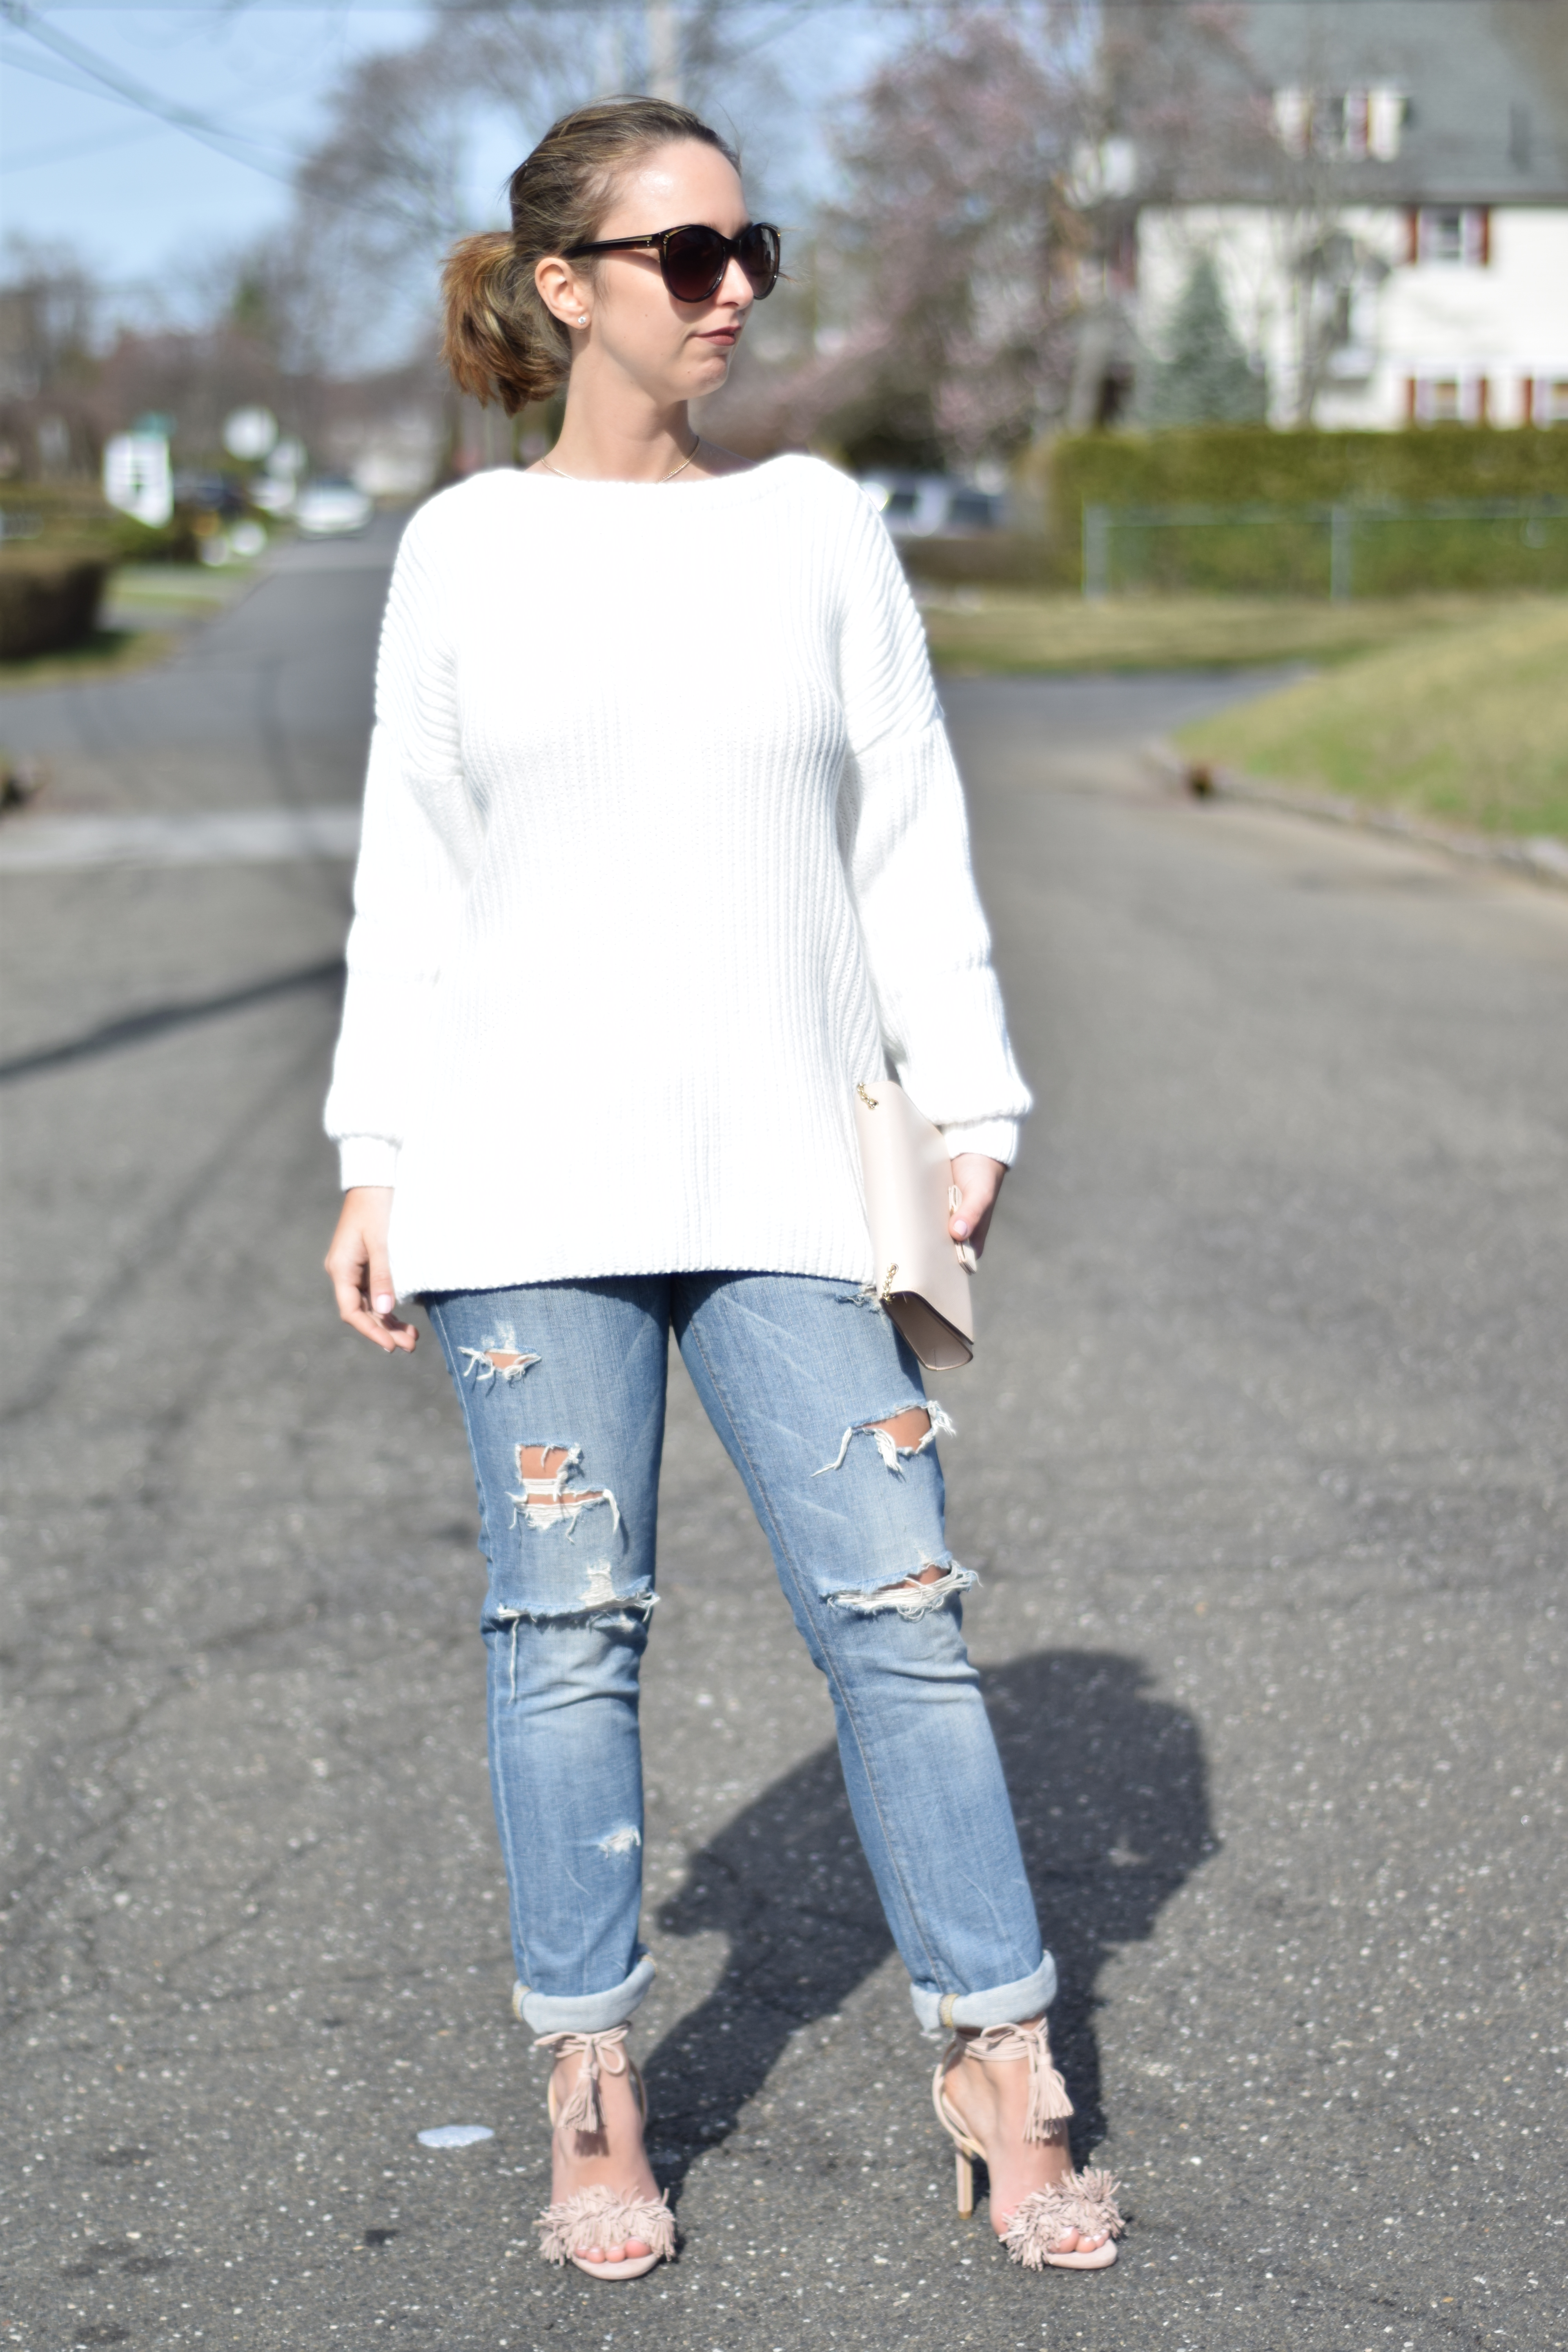 Business in the Front - You Know The Rest! White Sweater - Outfit - Style - Spring - Ripped Jeans #bloggerstyle #fashion #Oufit #westchester #simplybysimone #sweater